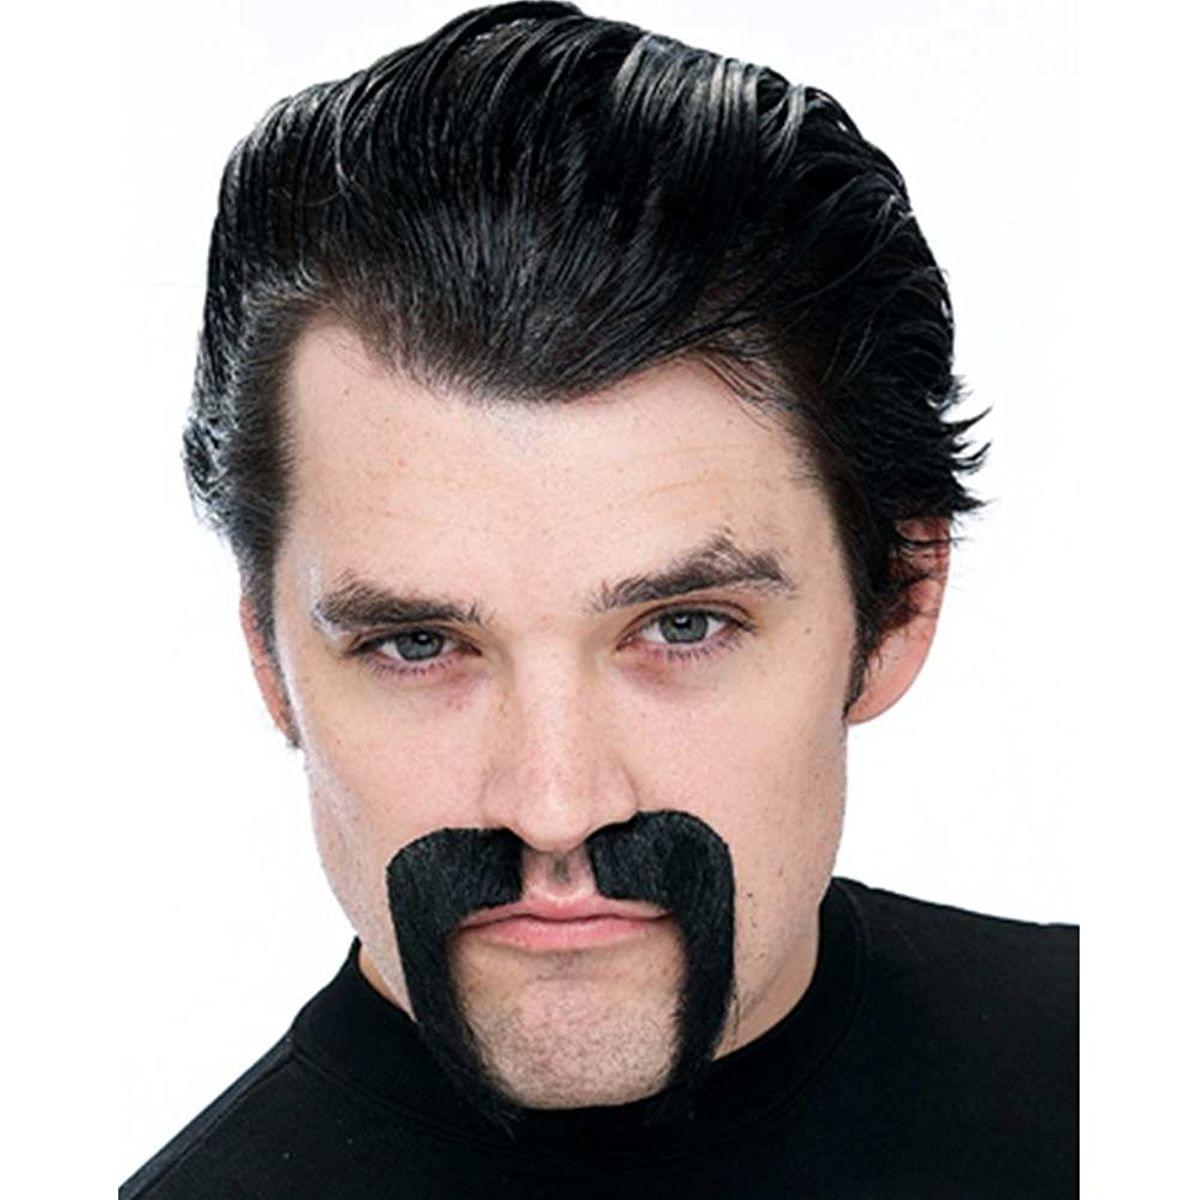 China Man Costume Goatee and Mustache Adult One Size